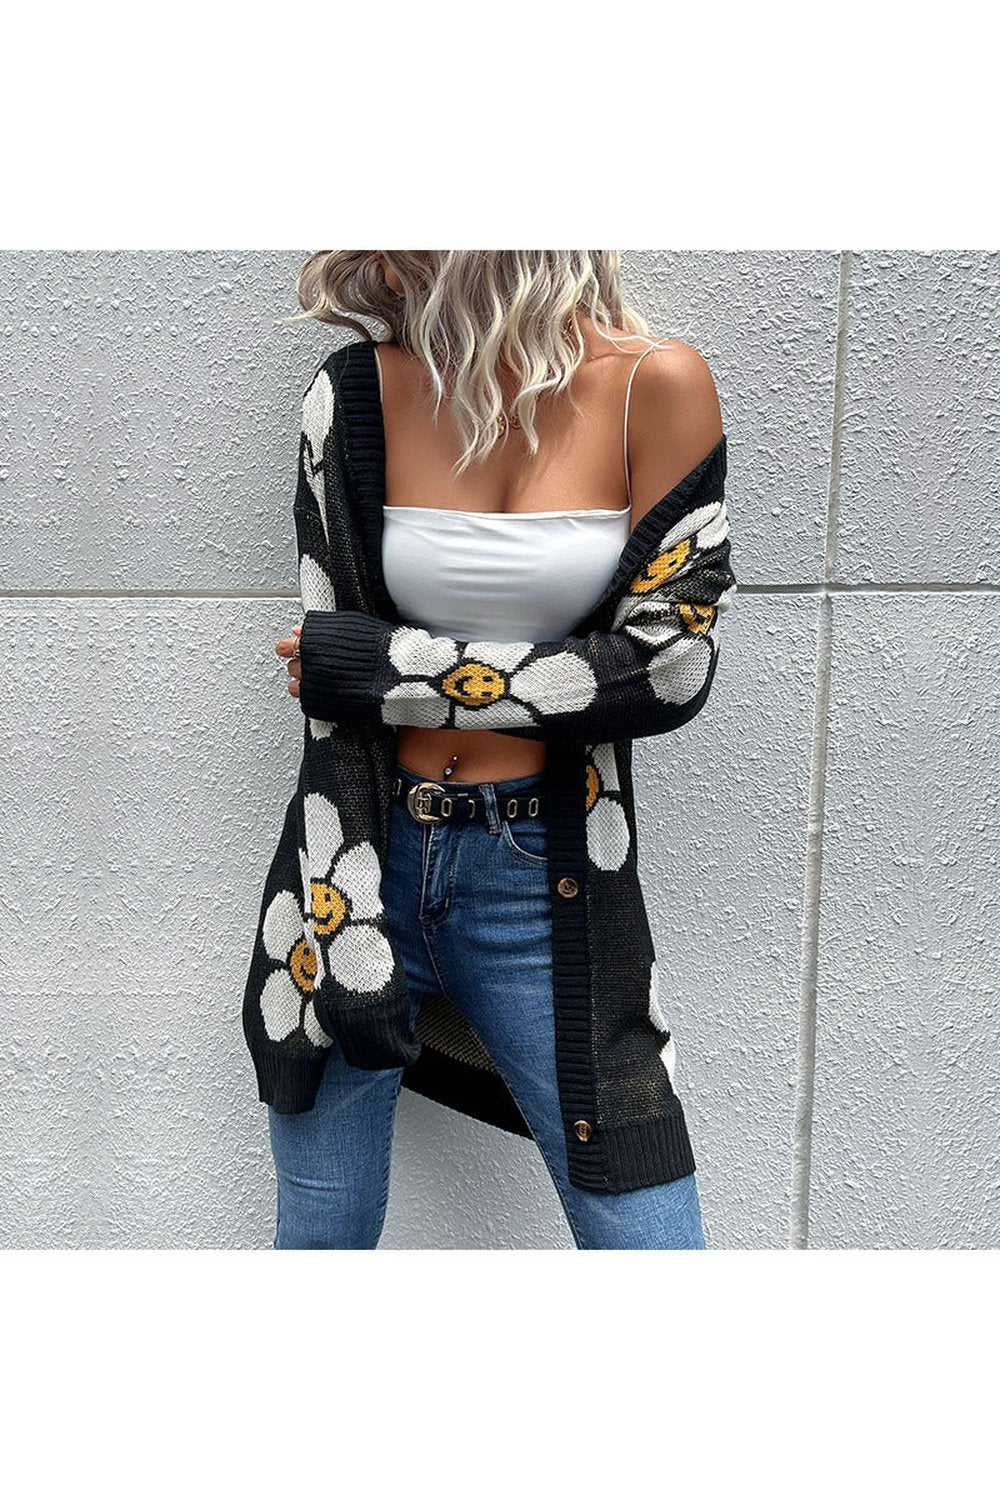 Floral Button Down Longline Cardigan - Cardigans - FITGGINS